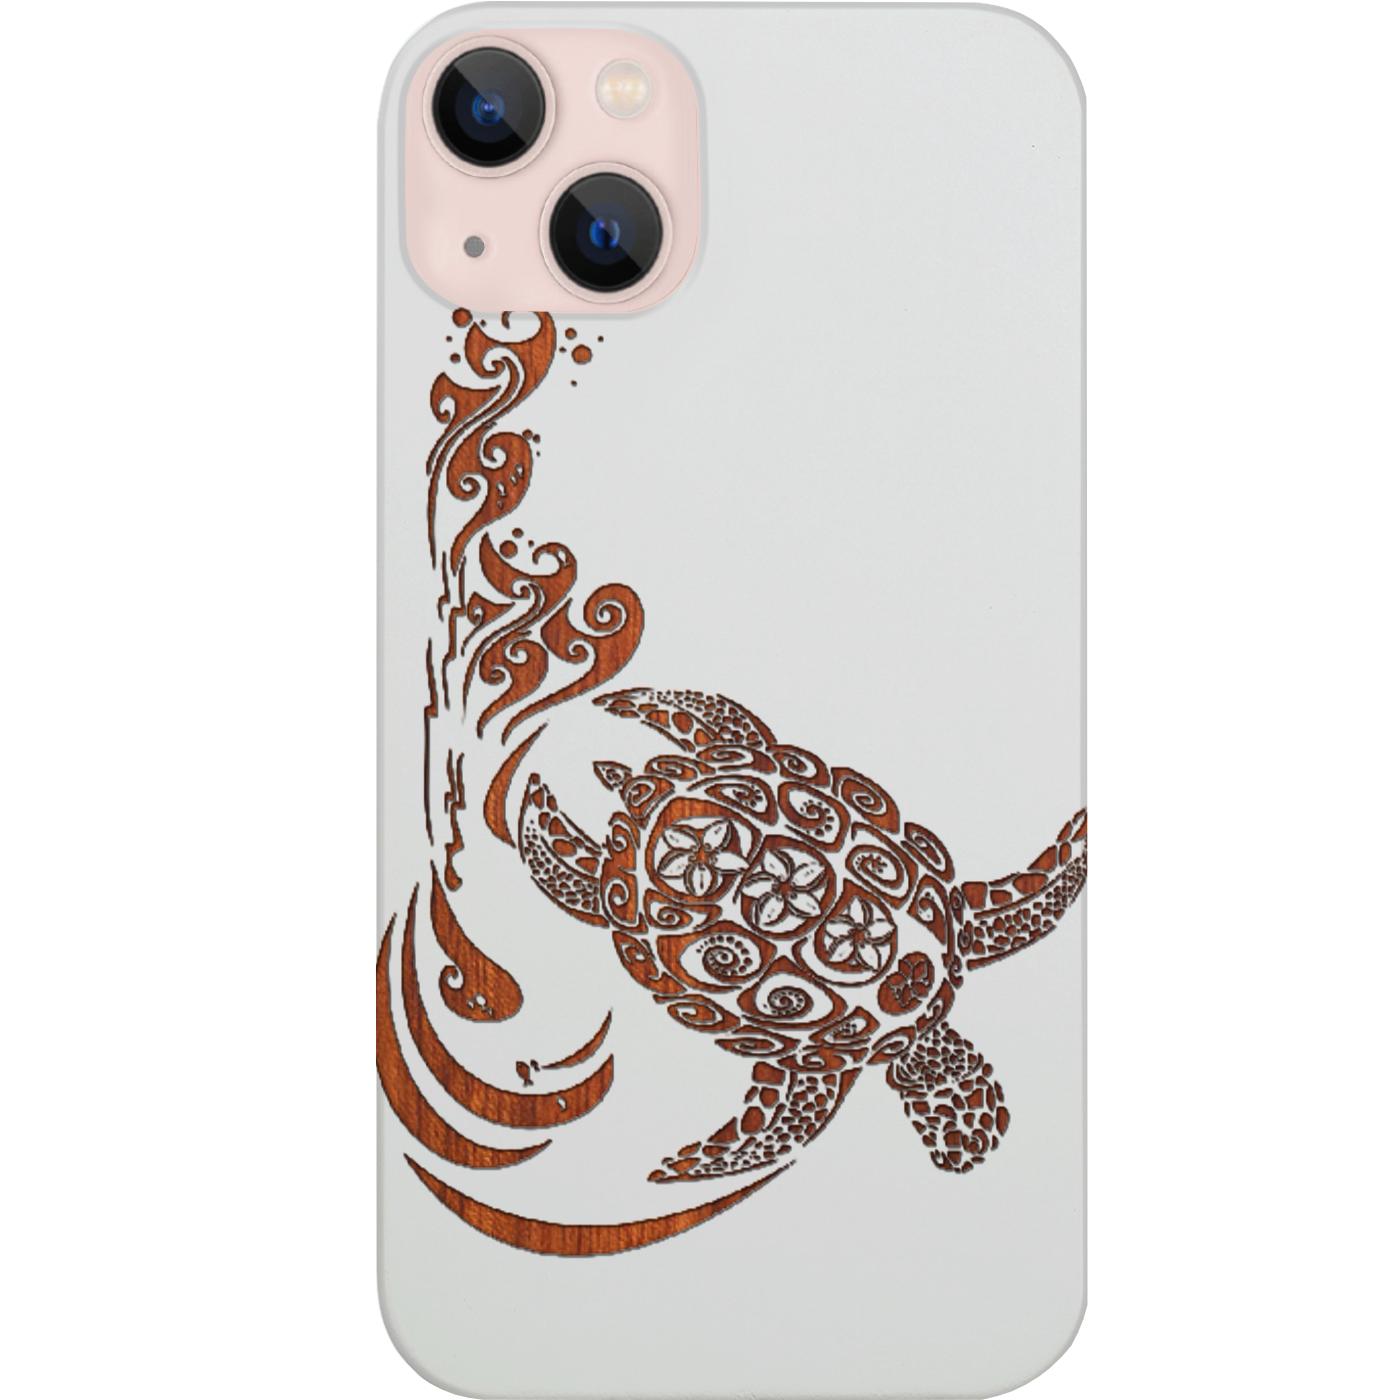 University of Louisville Tribal Design on Samsung Galaxy S3 Thinshield Case  by Coveroo 